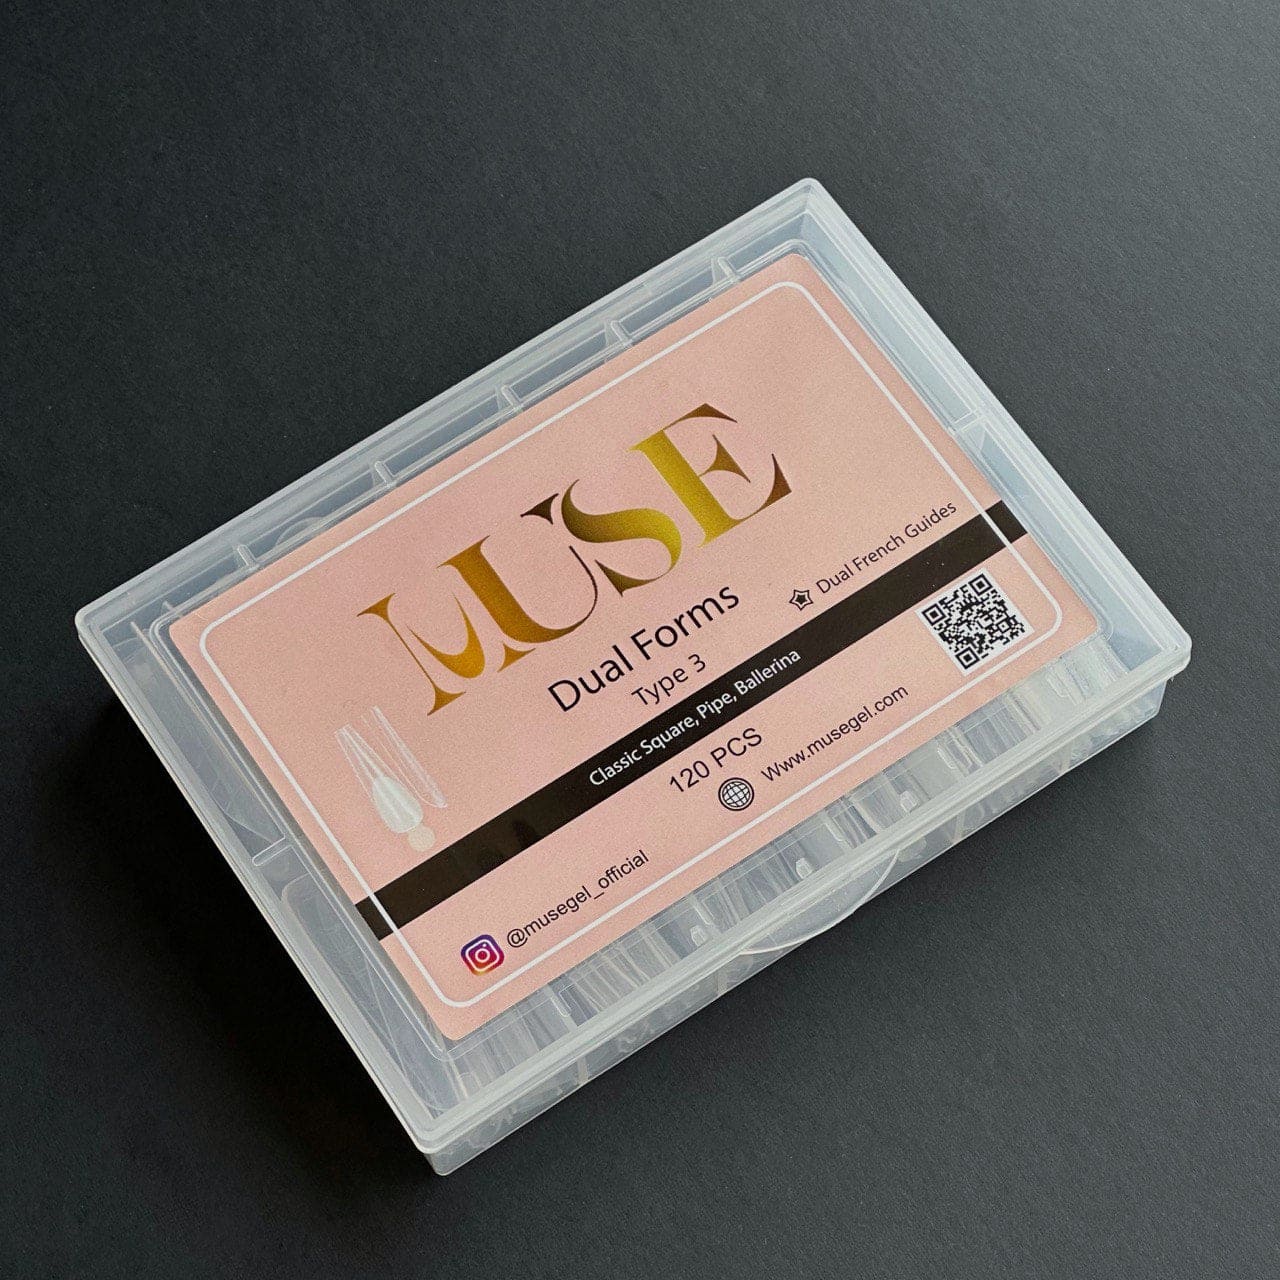 Universal Dual Forms Kit – Type 3 Classic Square, Pipe, Ballerina + silicon Dual French guides